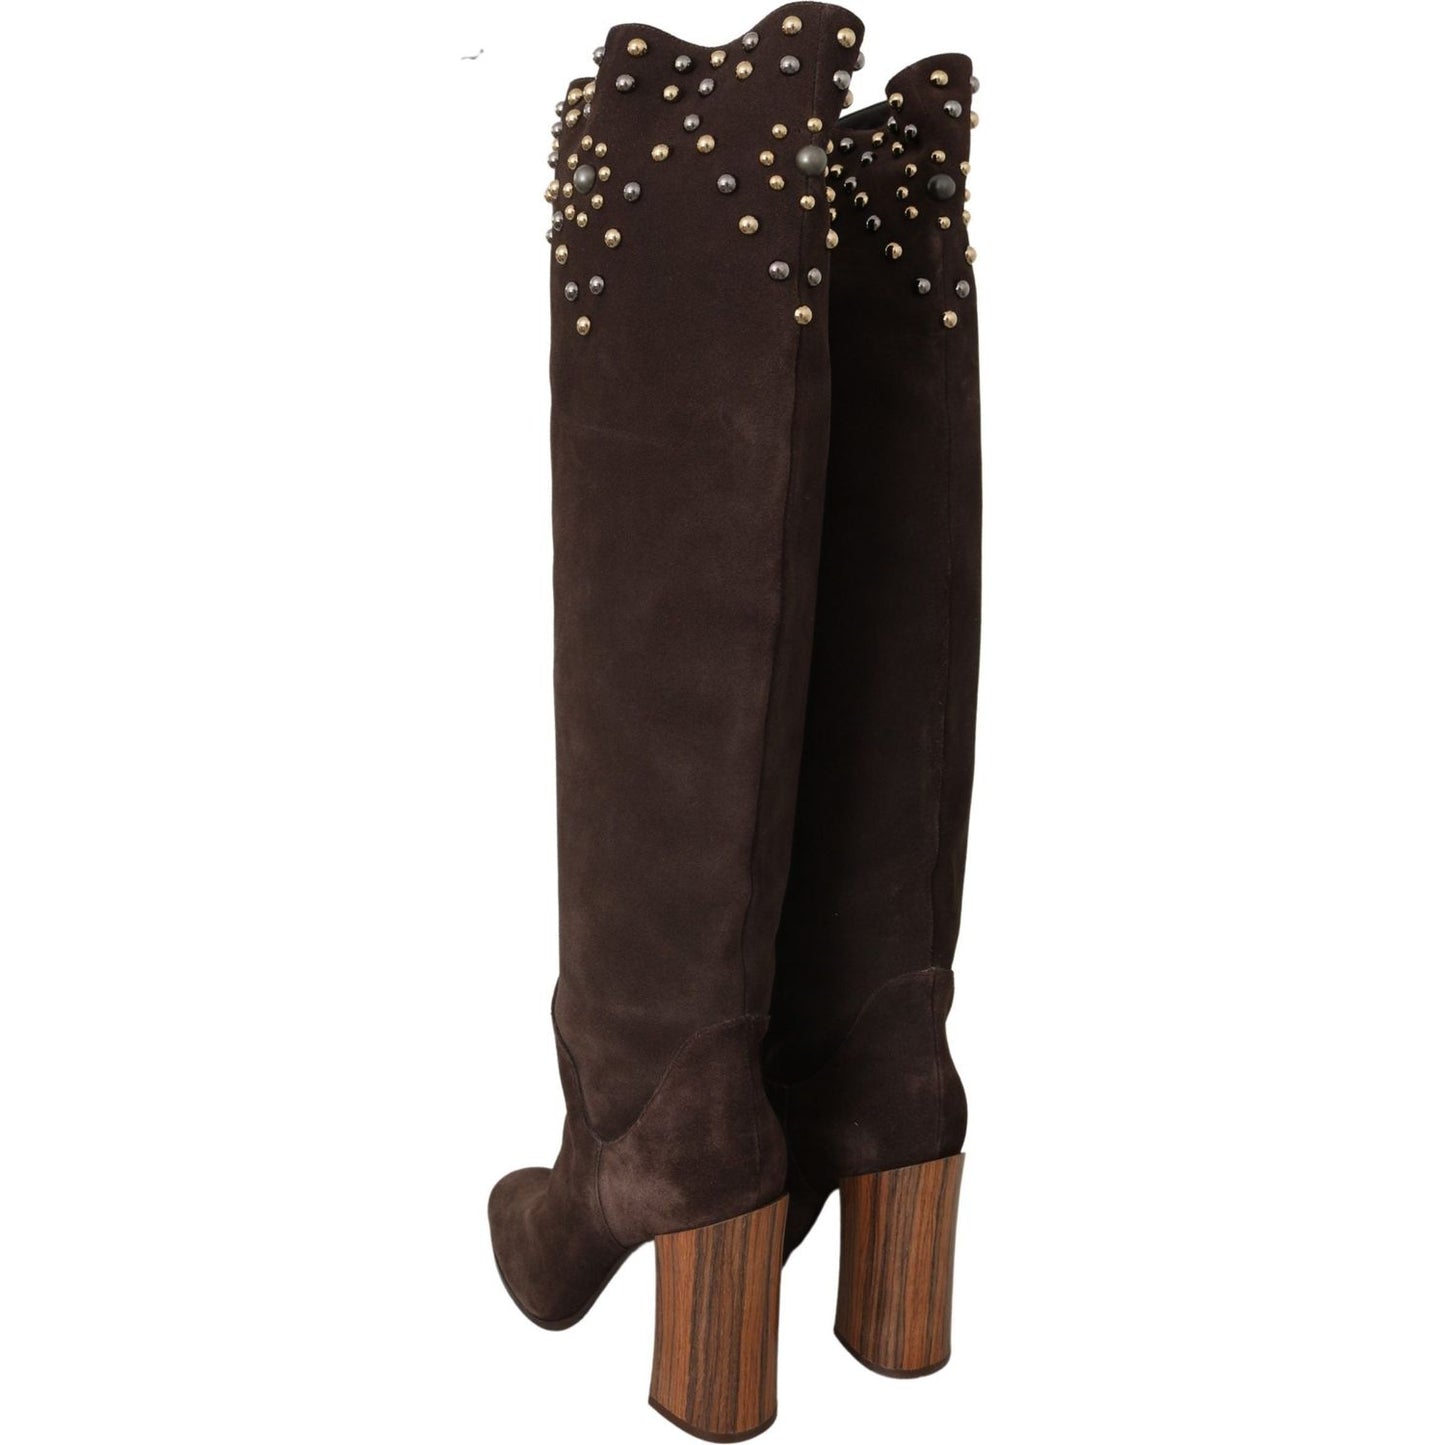 Dolce & Gabbana Studded Suede Knee High Boots in Brown brown-suede-studded-knee-high-shoes-boots IMG_1083-scaled-4c712e19-ef0.jpg